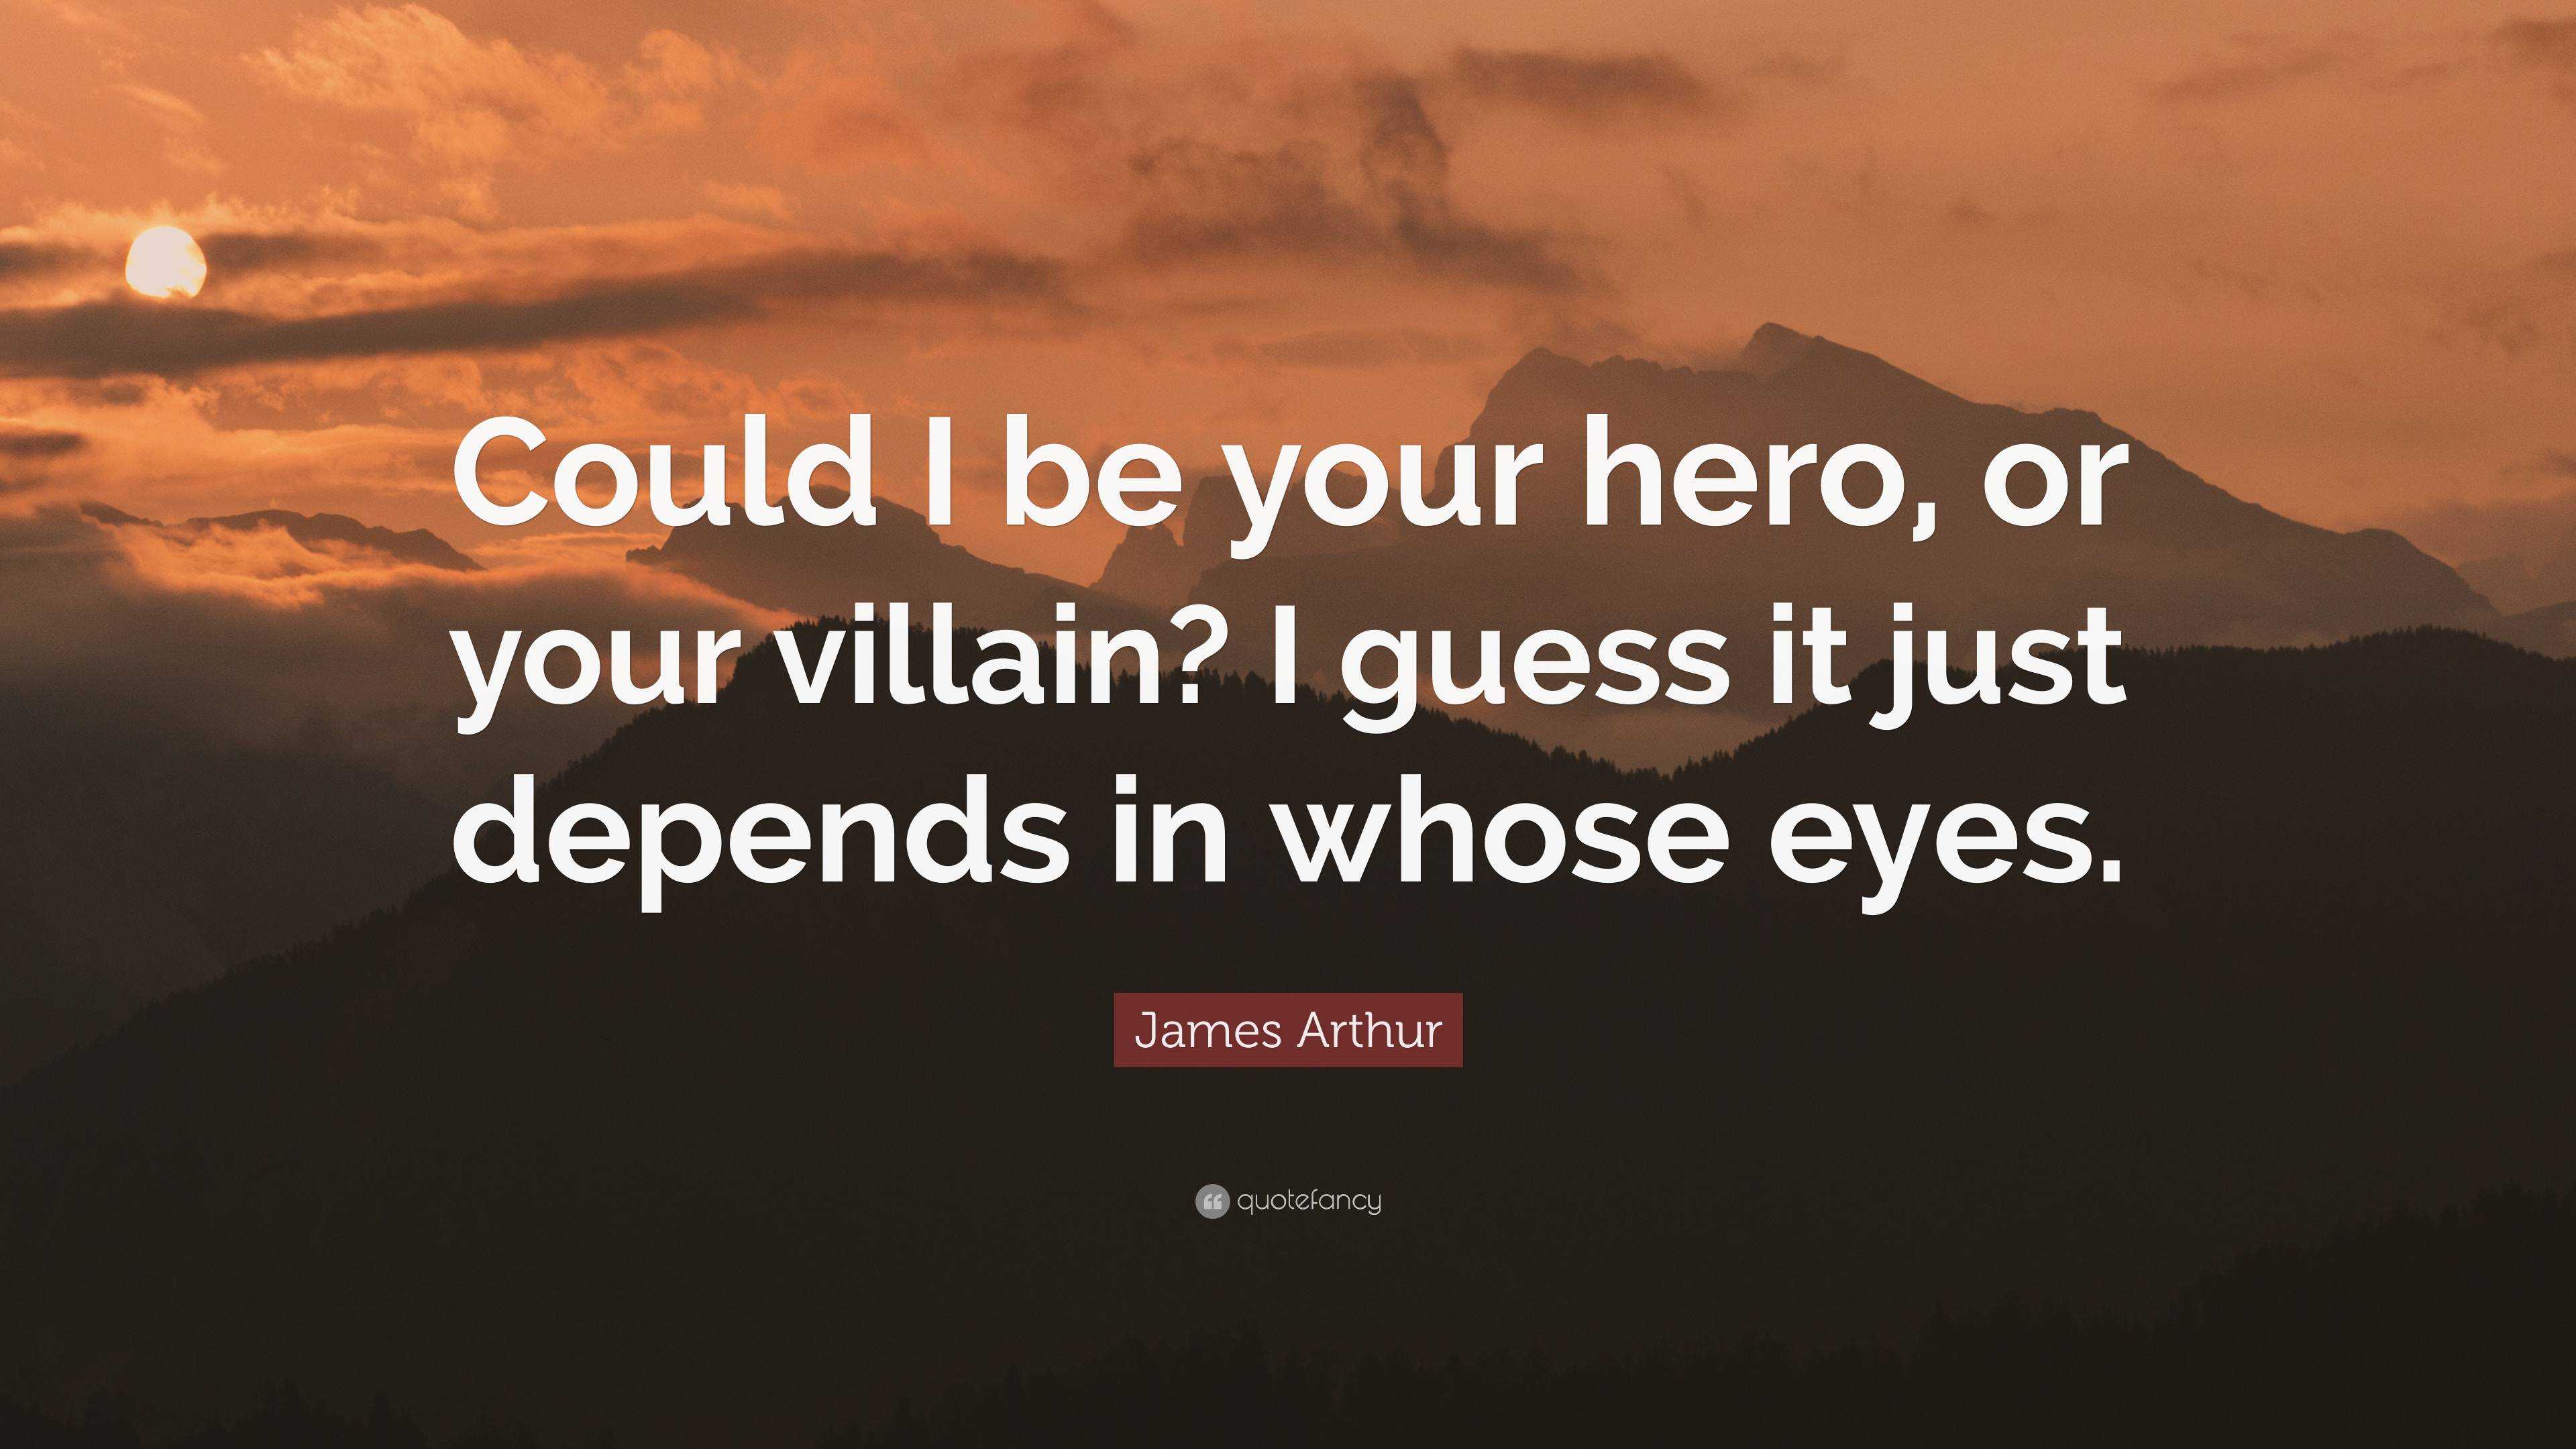 James Arthur Quote: “Could I be your hero, or your villain? I guess it ...